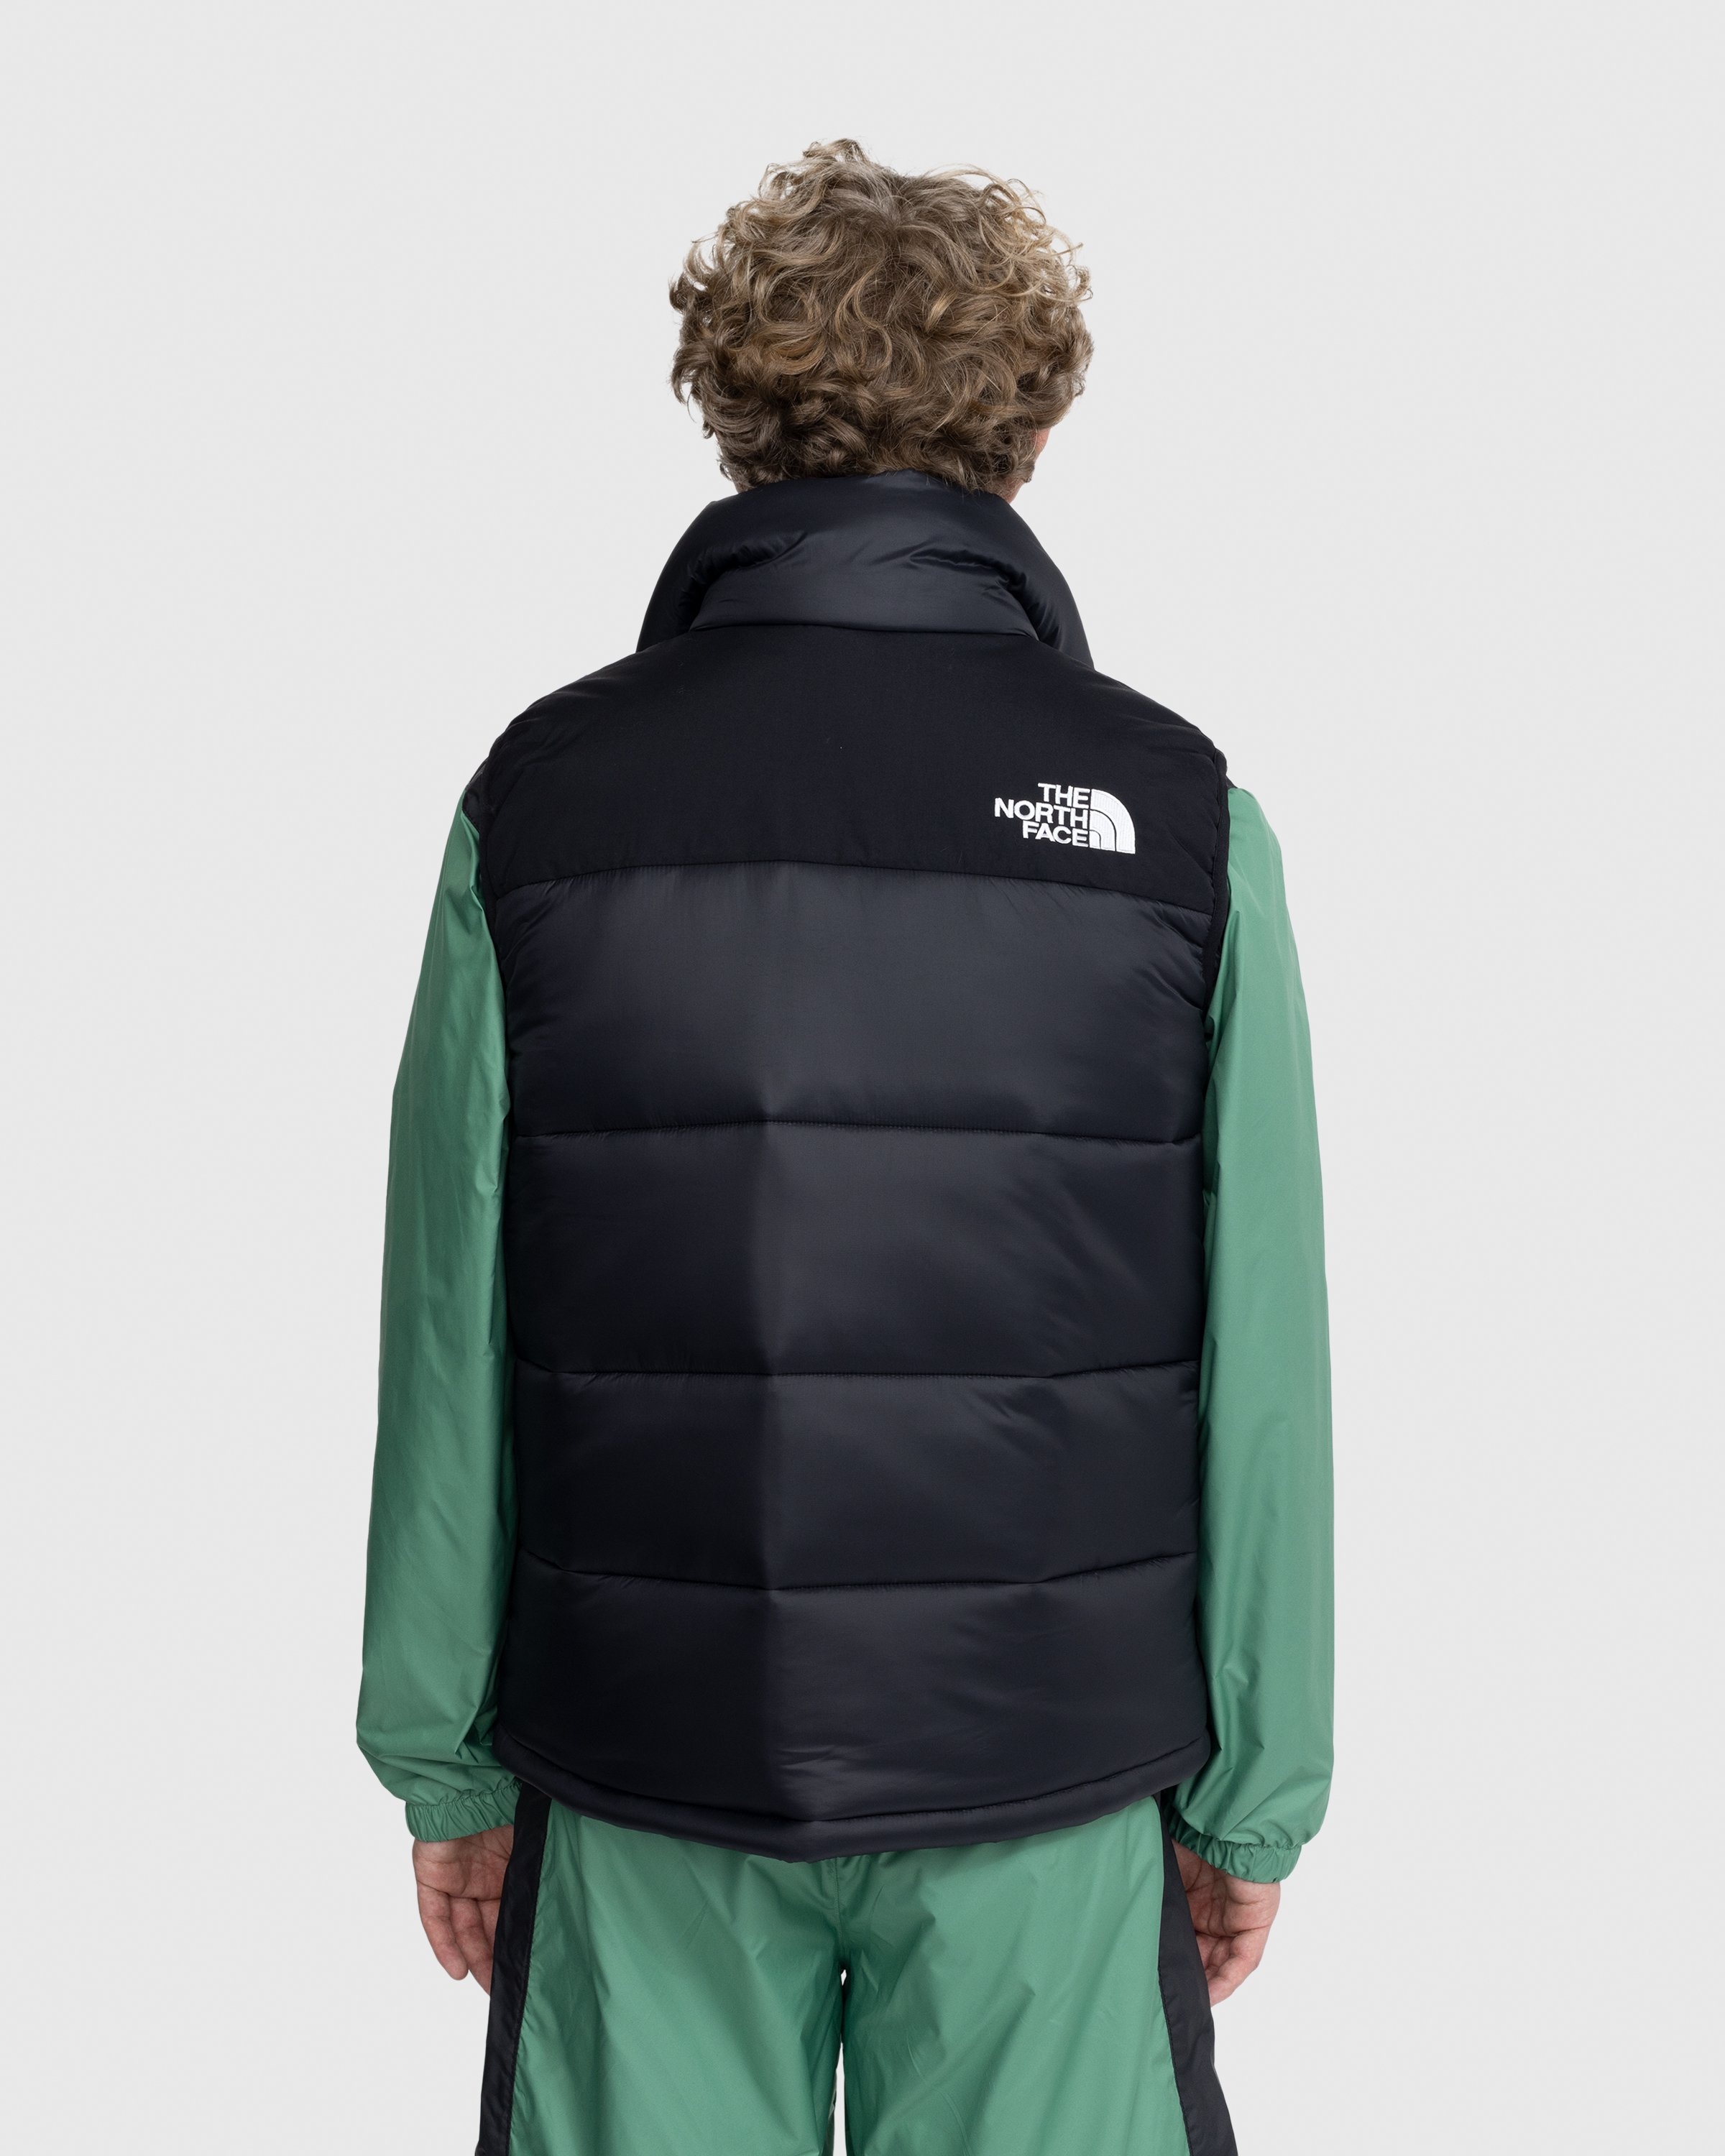 The North Face – Himalayan Synth Vest TNF Black - Outerwear - Black - Image 3